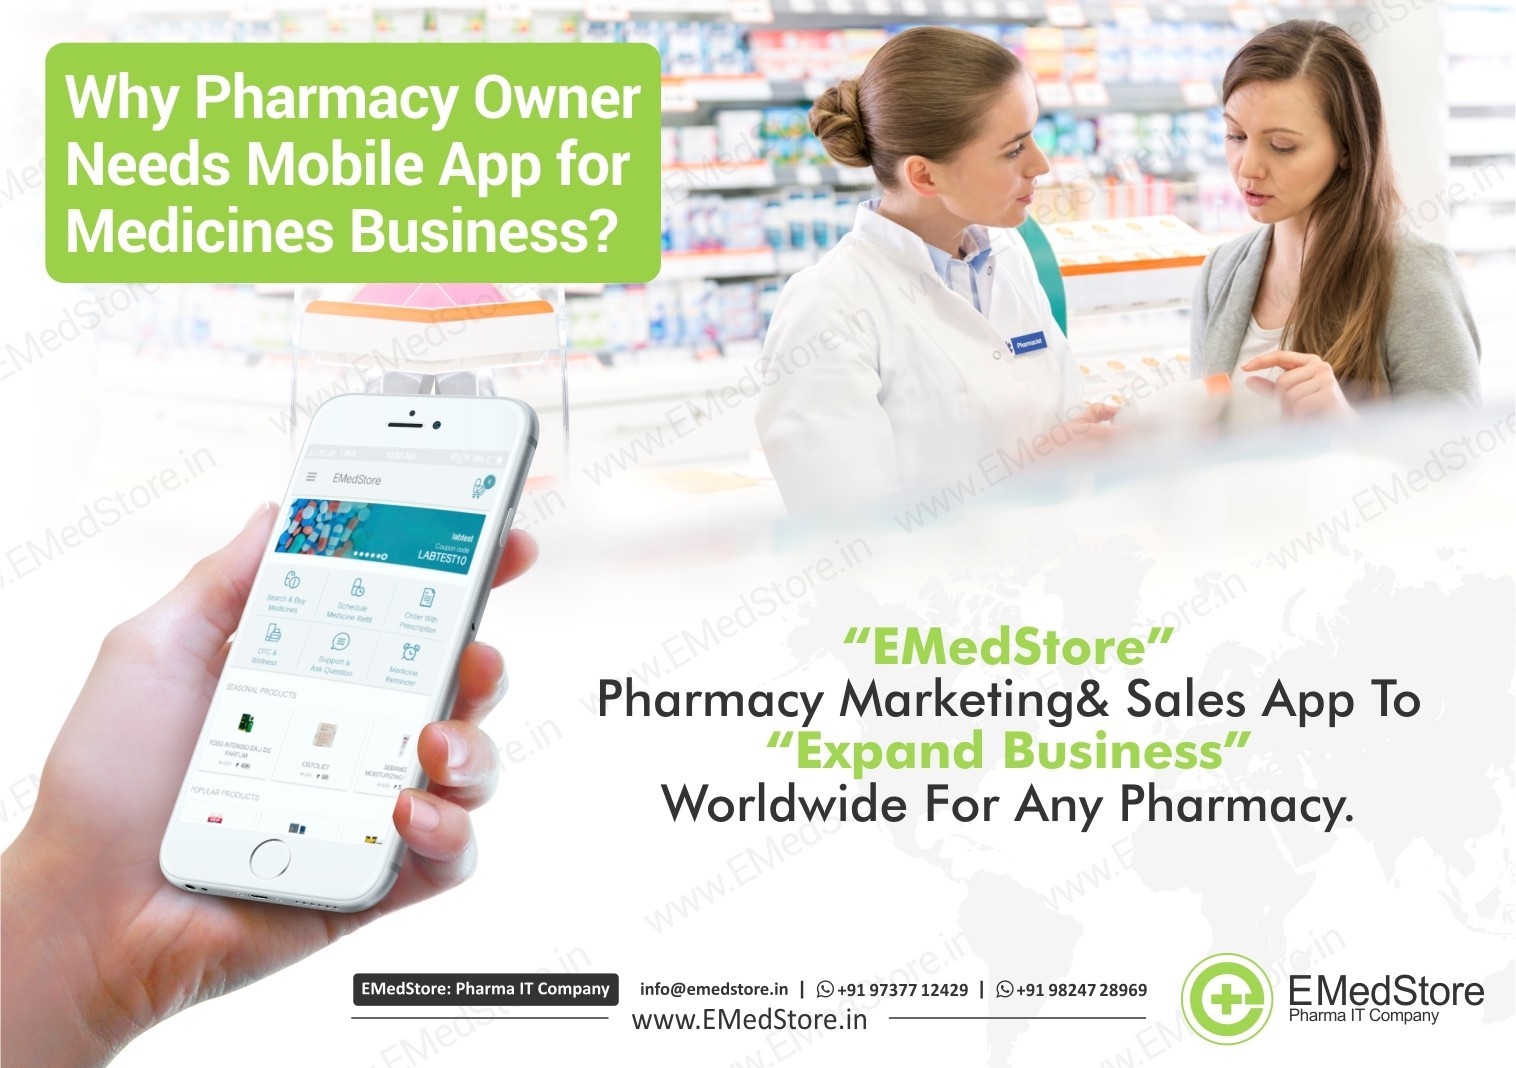 Why Do Pharmacy Owners Need an App For Medicines Business Worldwide?